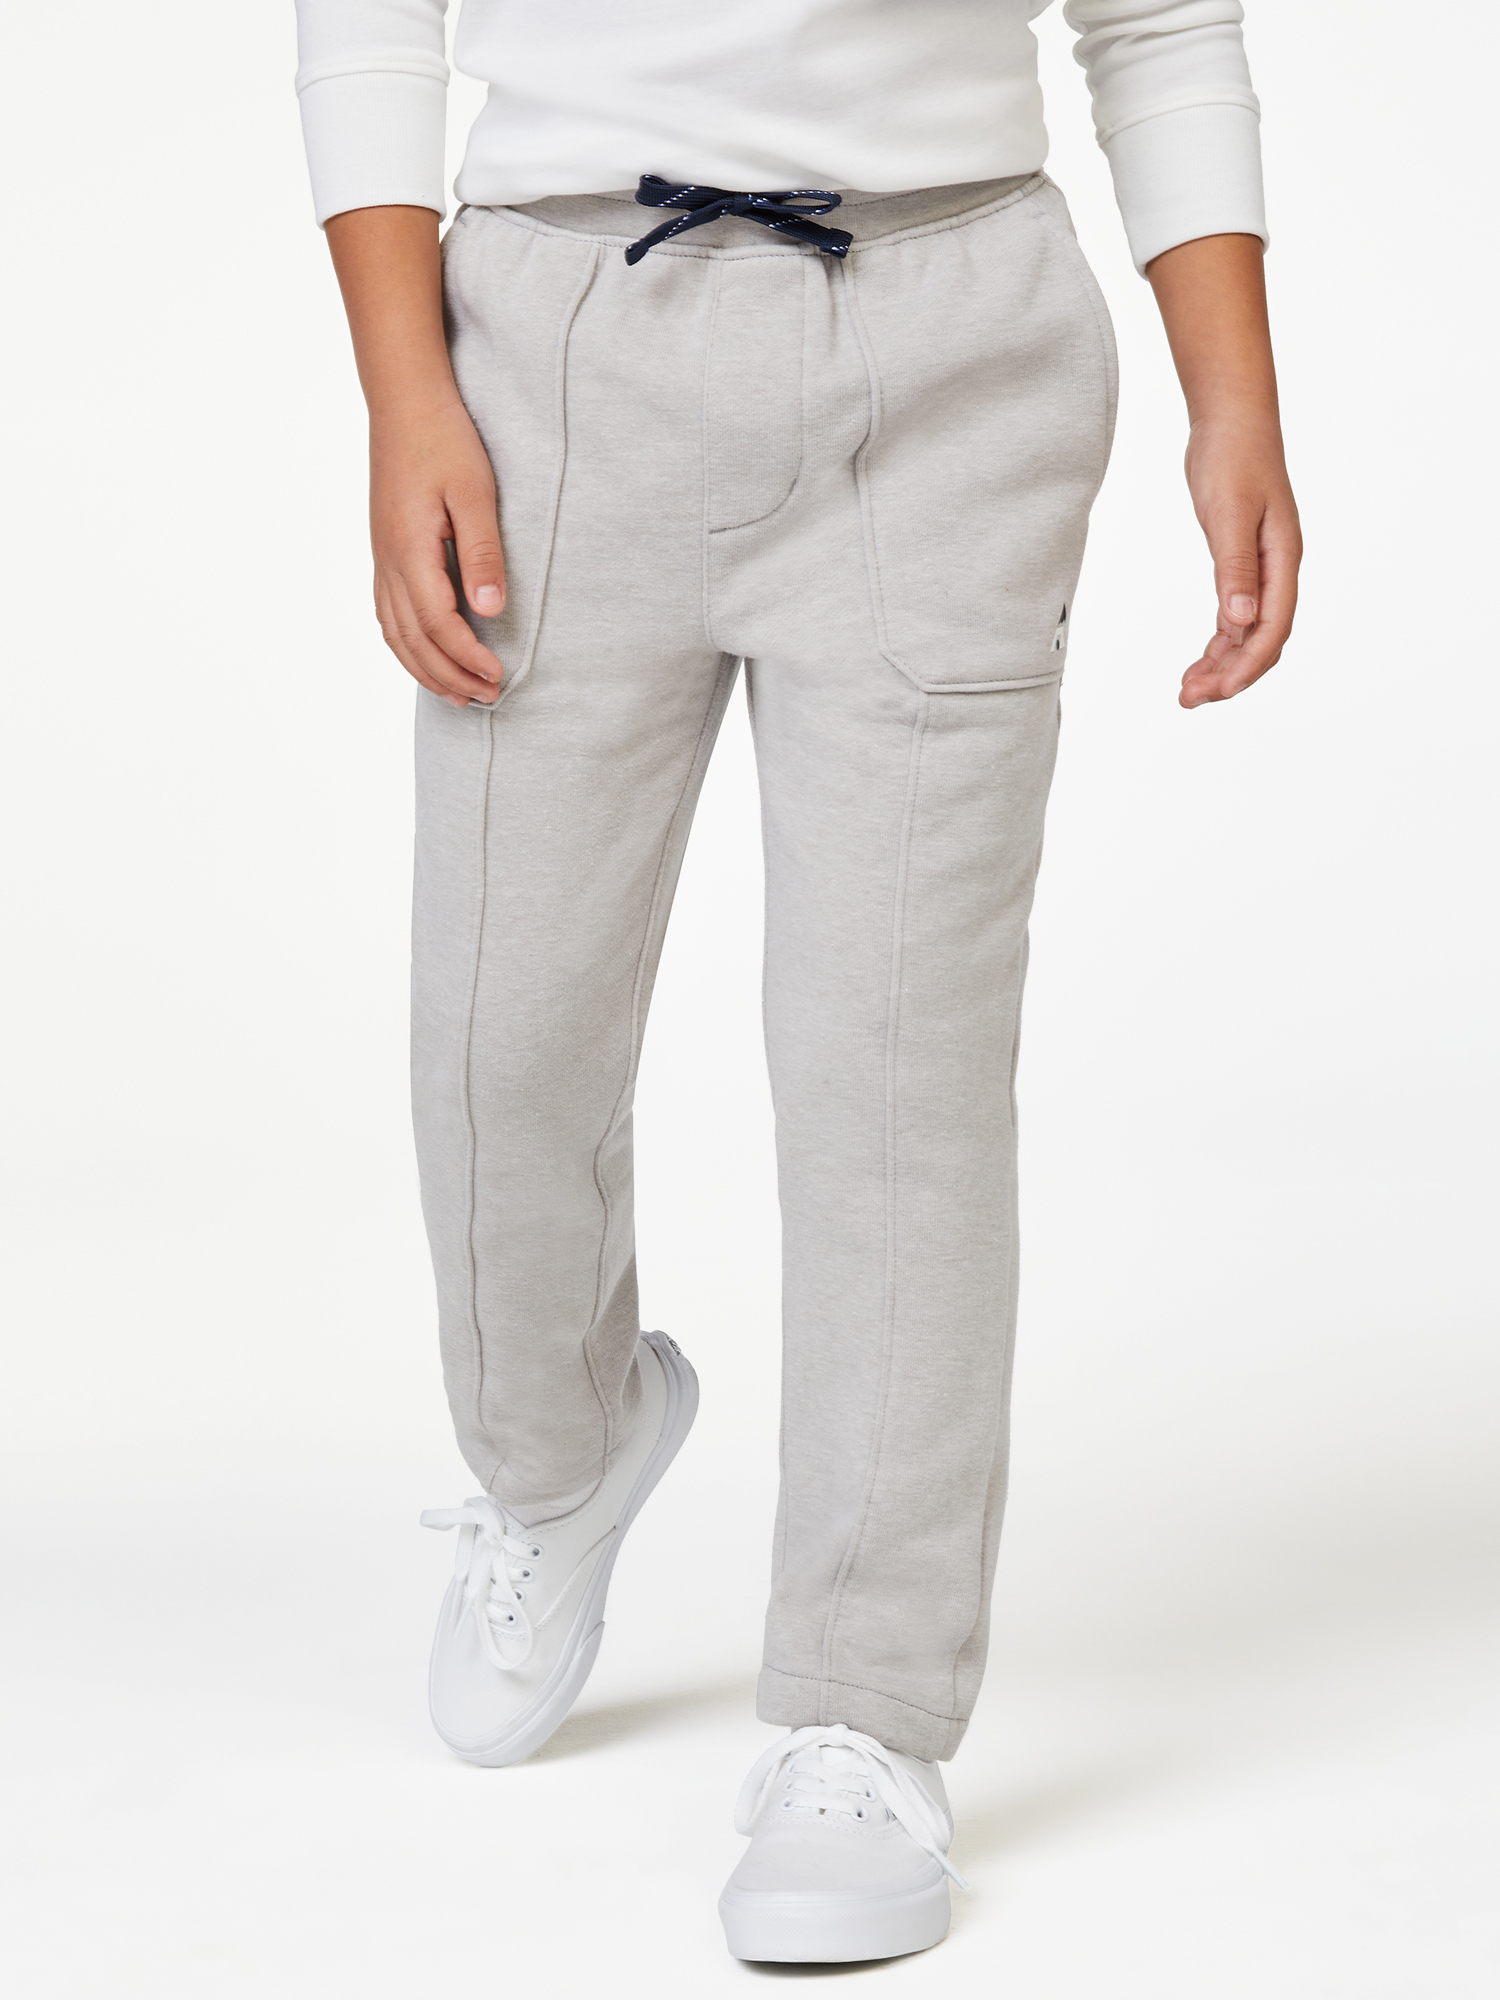 Free Assembly Boys Fleece Fatigue Pants, Sizes 4-18 - image 1 of 5